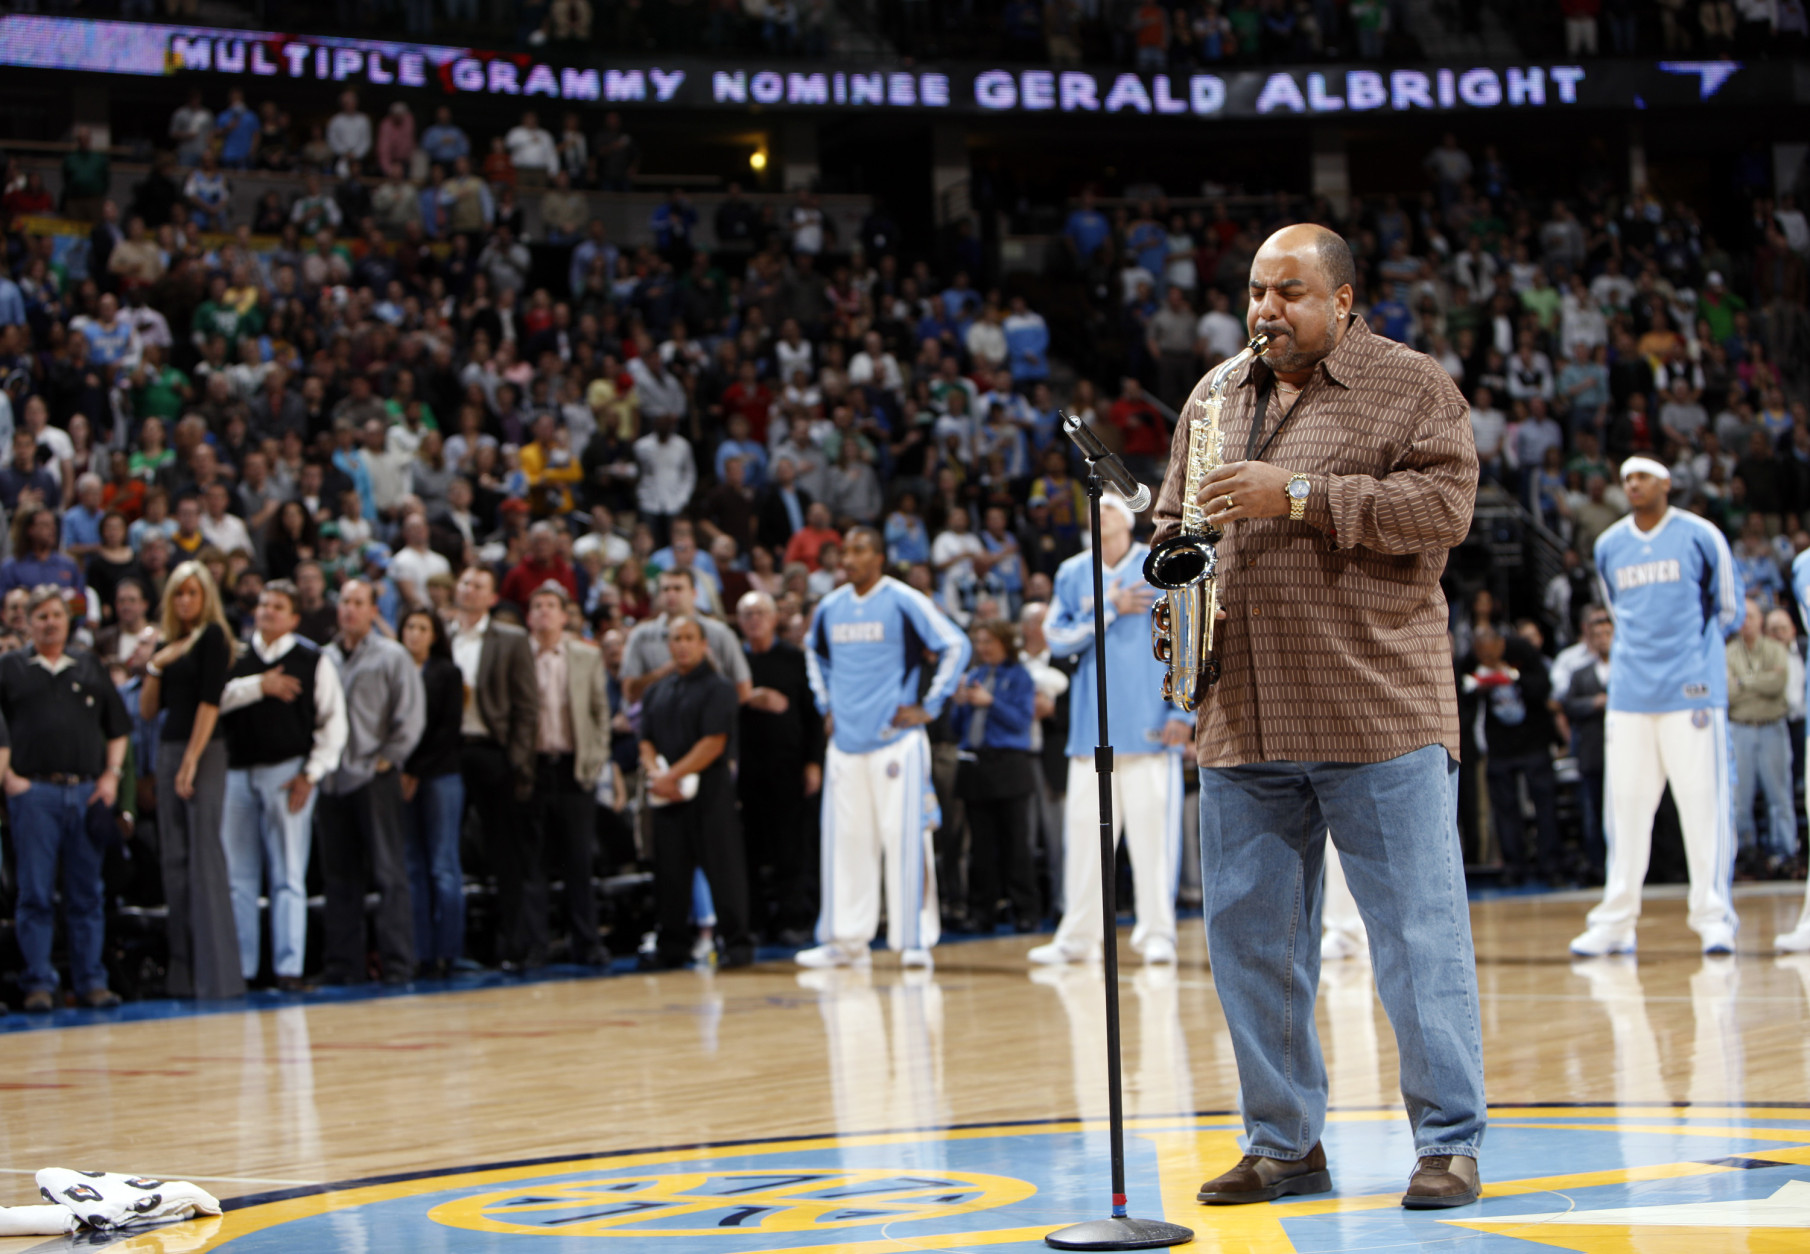 Gerald Albright plays the National Anthem before the Denver Nuggets face the Boston Celtics in the first quarter of an NBA basketball game in Denver on Monday, Feb. 23, 2009. (AP Photo/David Zalubowski)